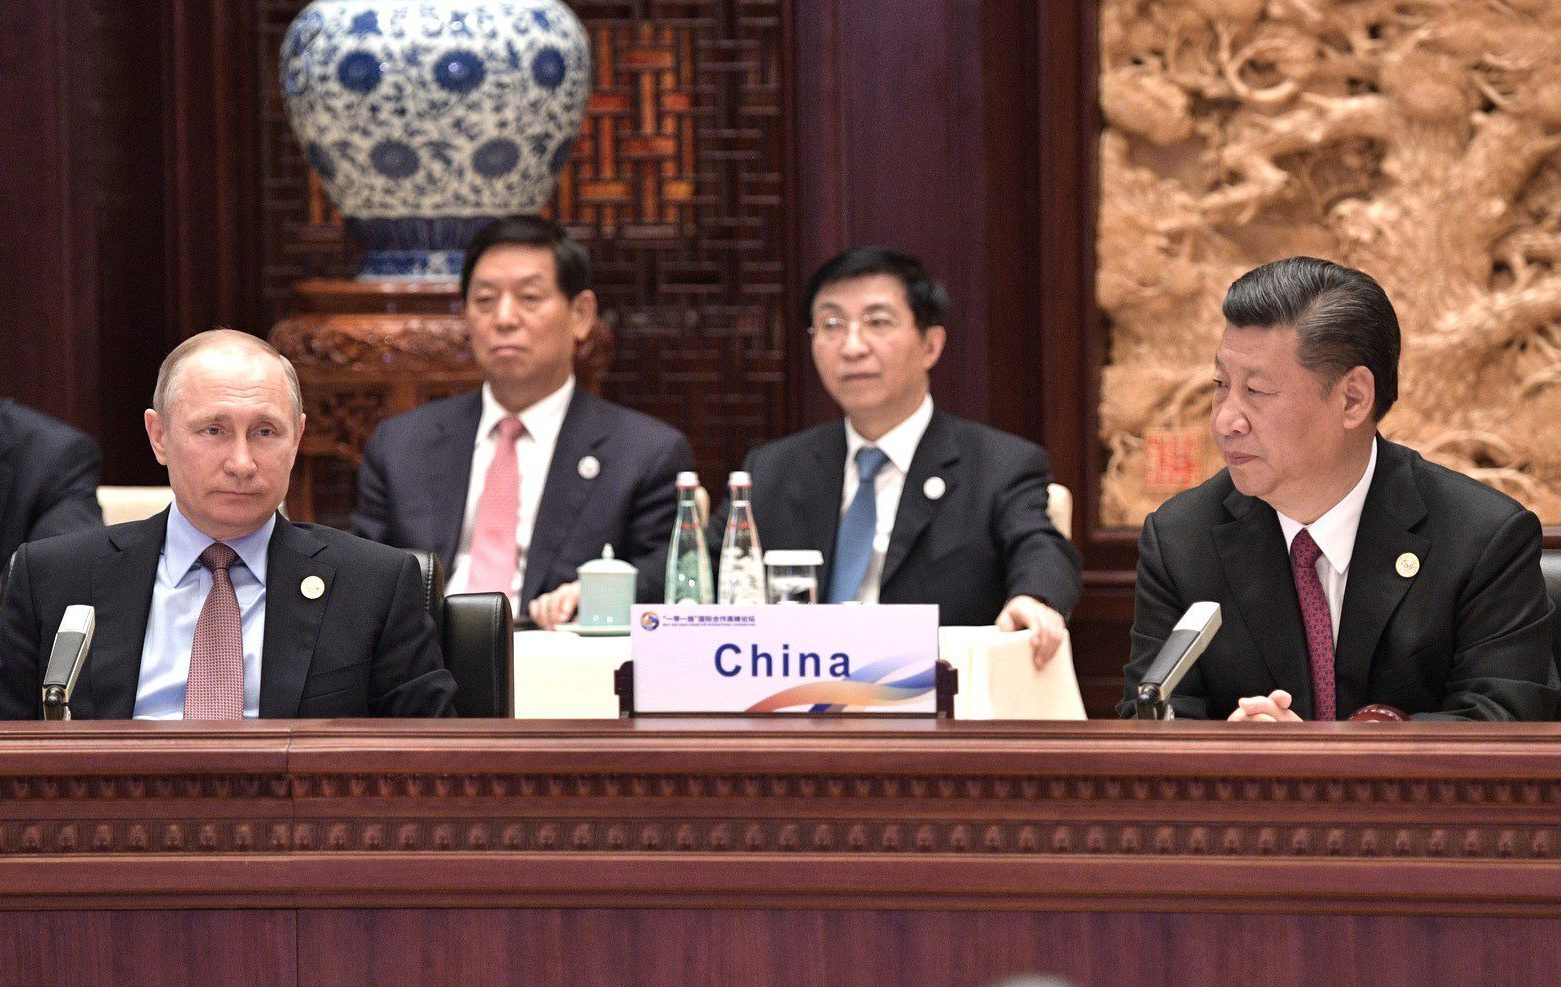 With_President_of_China_Xi_Jinping_at_the_Belt_and_Road_international_forum